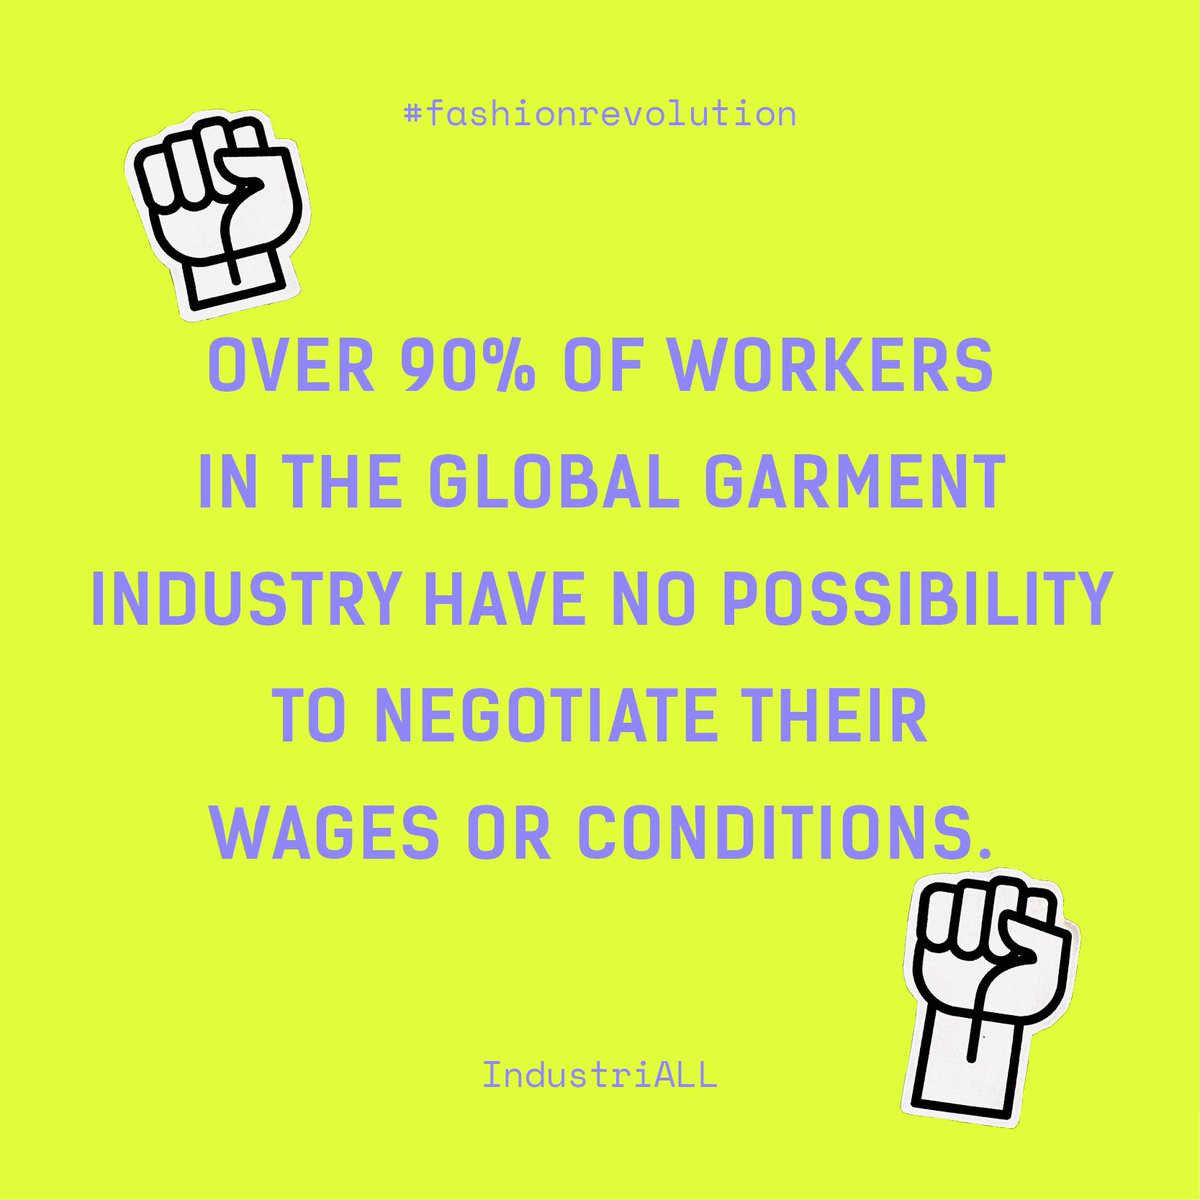 This, unfortunately is still a huge problem around the world. Factory workers make far less than a living wage. They are often forced to work 16+ hour days 6-7 days a week just to survive.